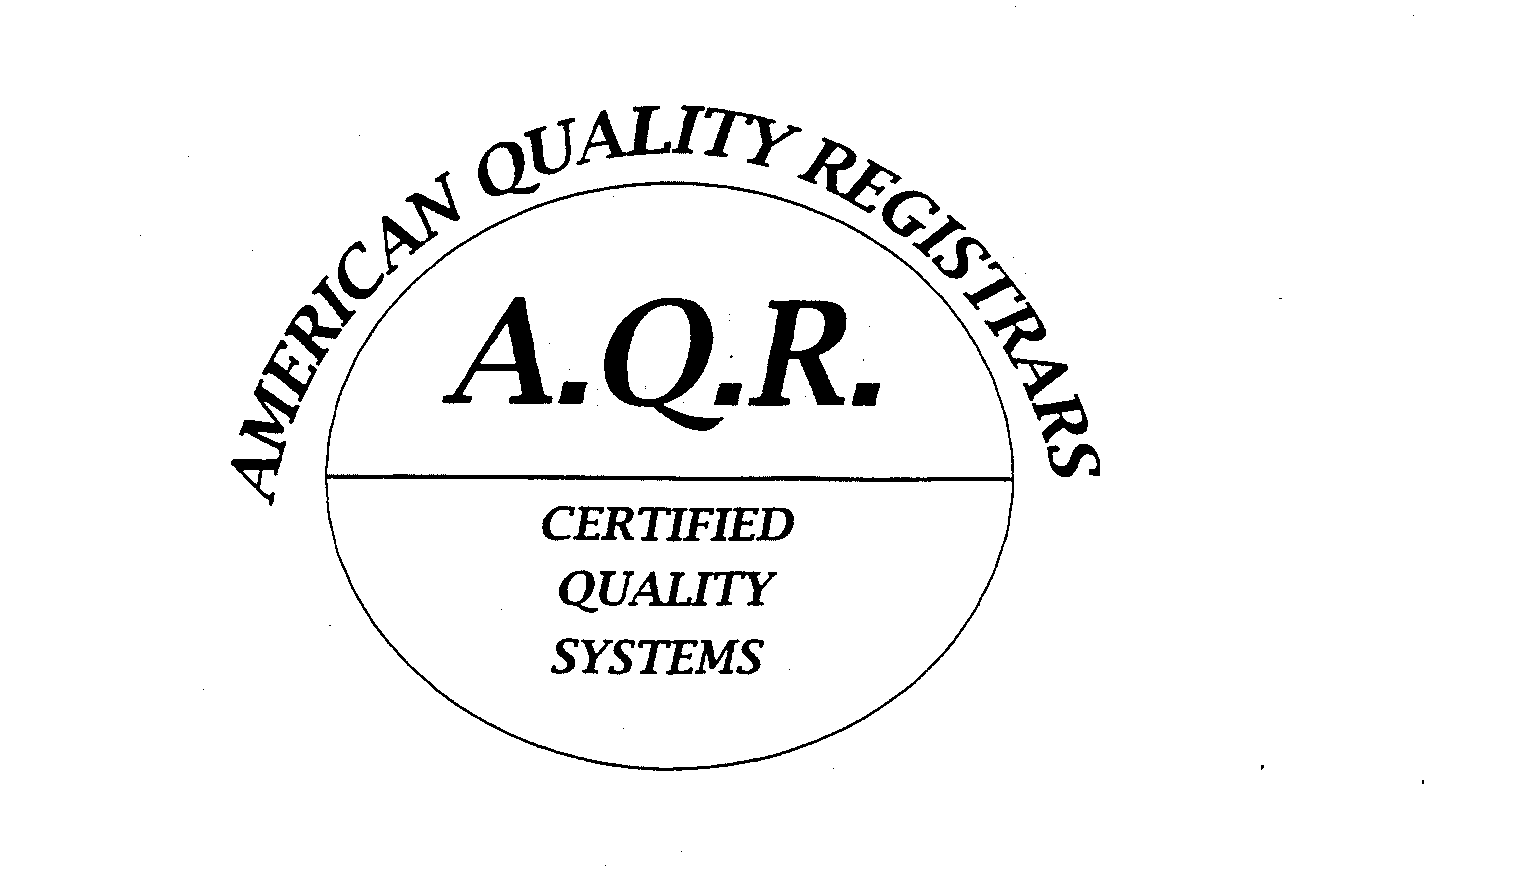  AMERICAN QUALITY REGISTRARS A.Q.R. CERTIFIED QUALITY SYSTEMS